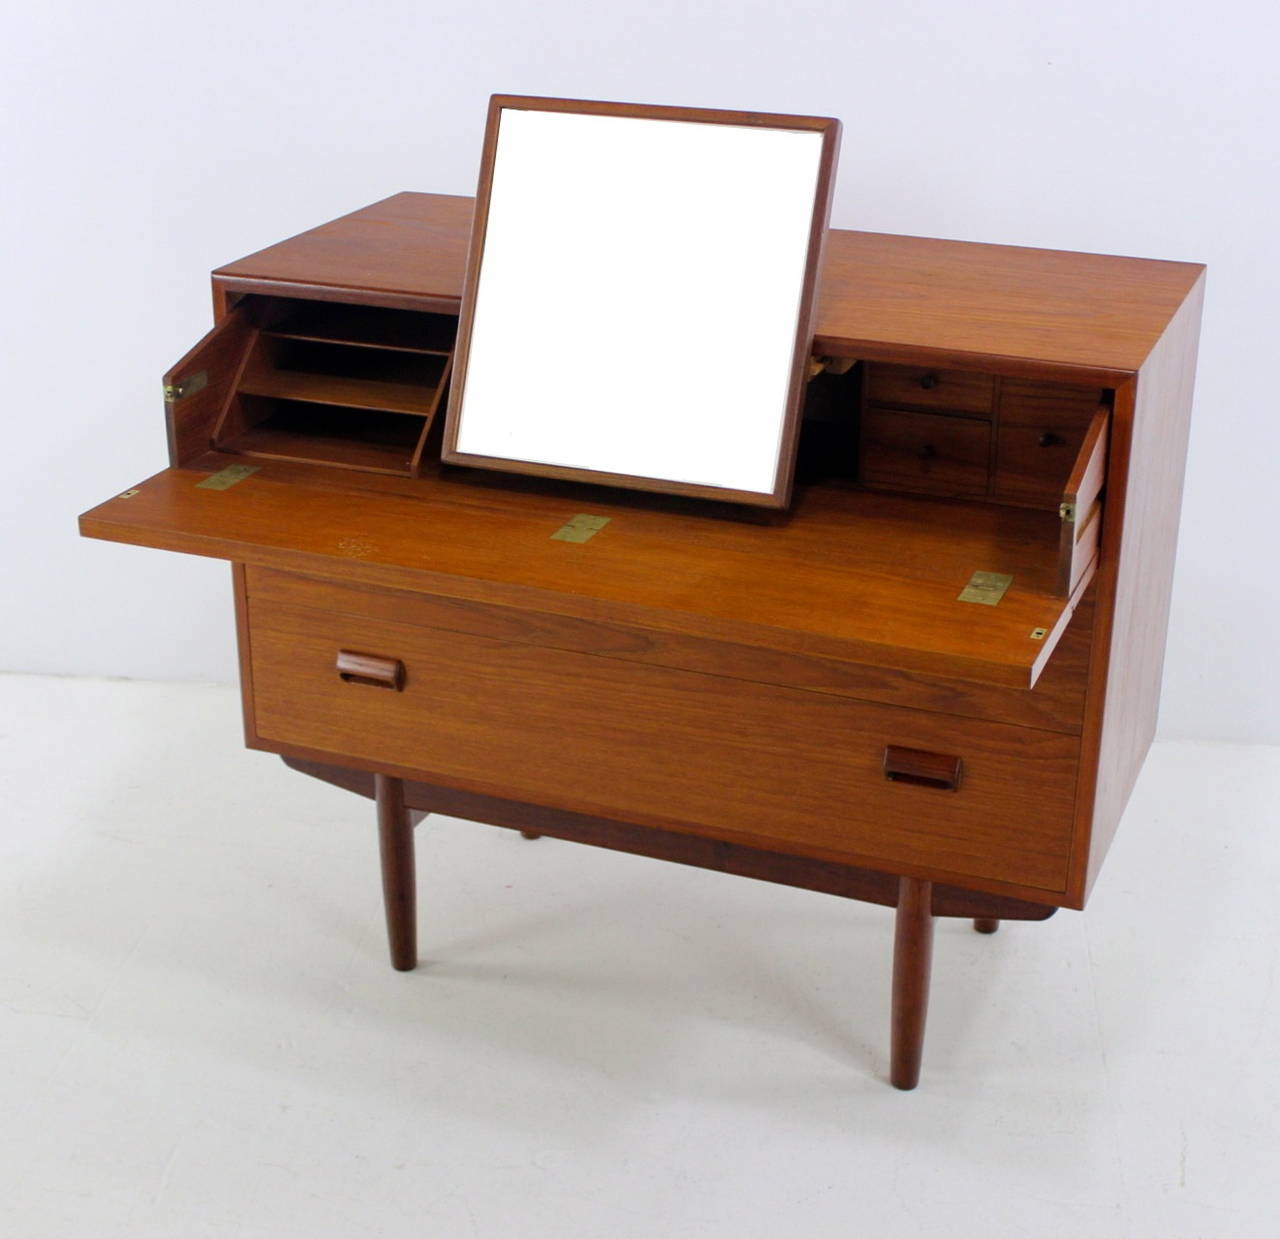 Danish modern vanity designed by Børge Mogensen.
Richly grained teak.
Top front flips down to reveal three drawers, three cubbies and pull-out mirror.
Classic Mogensen scupper drawer handles. Beautifully styled and constructed base. 
Matching